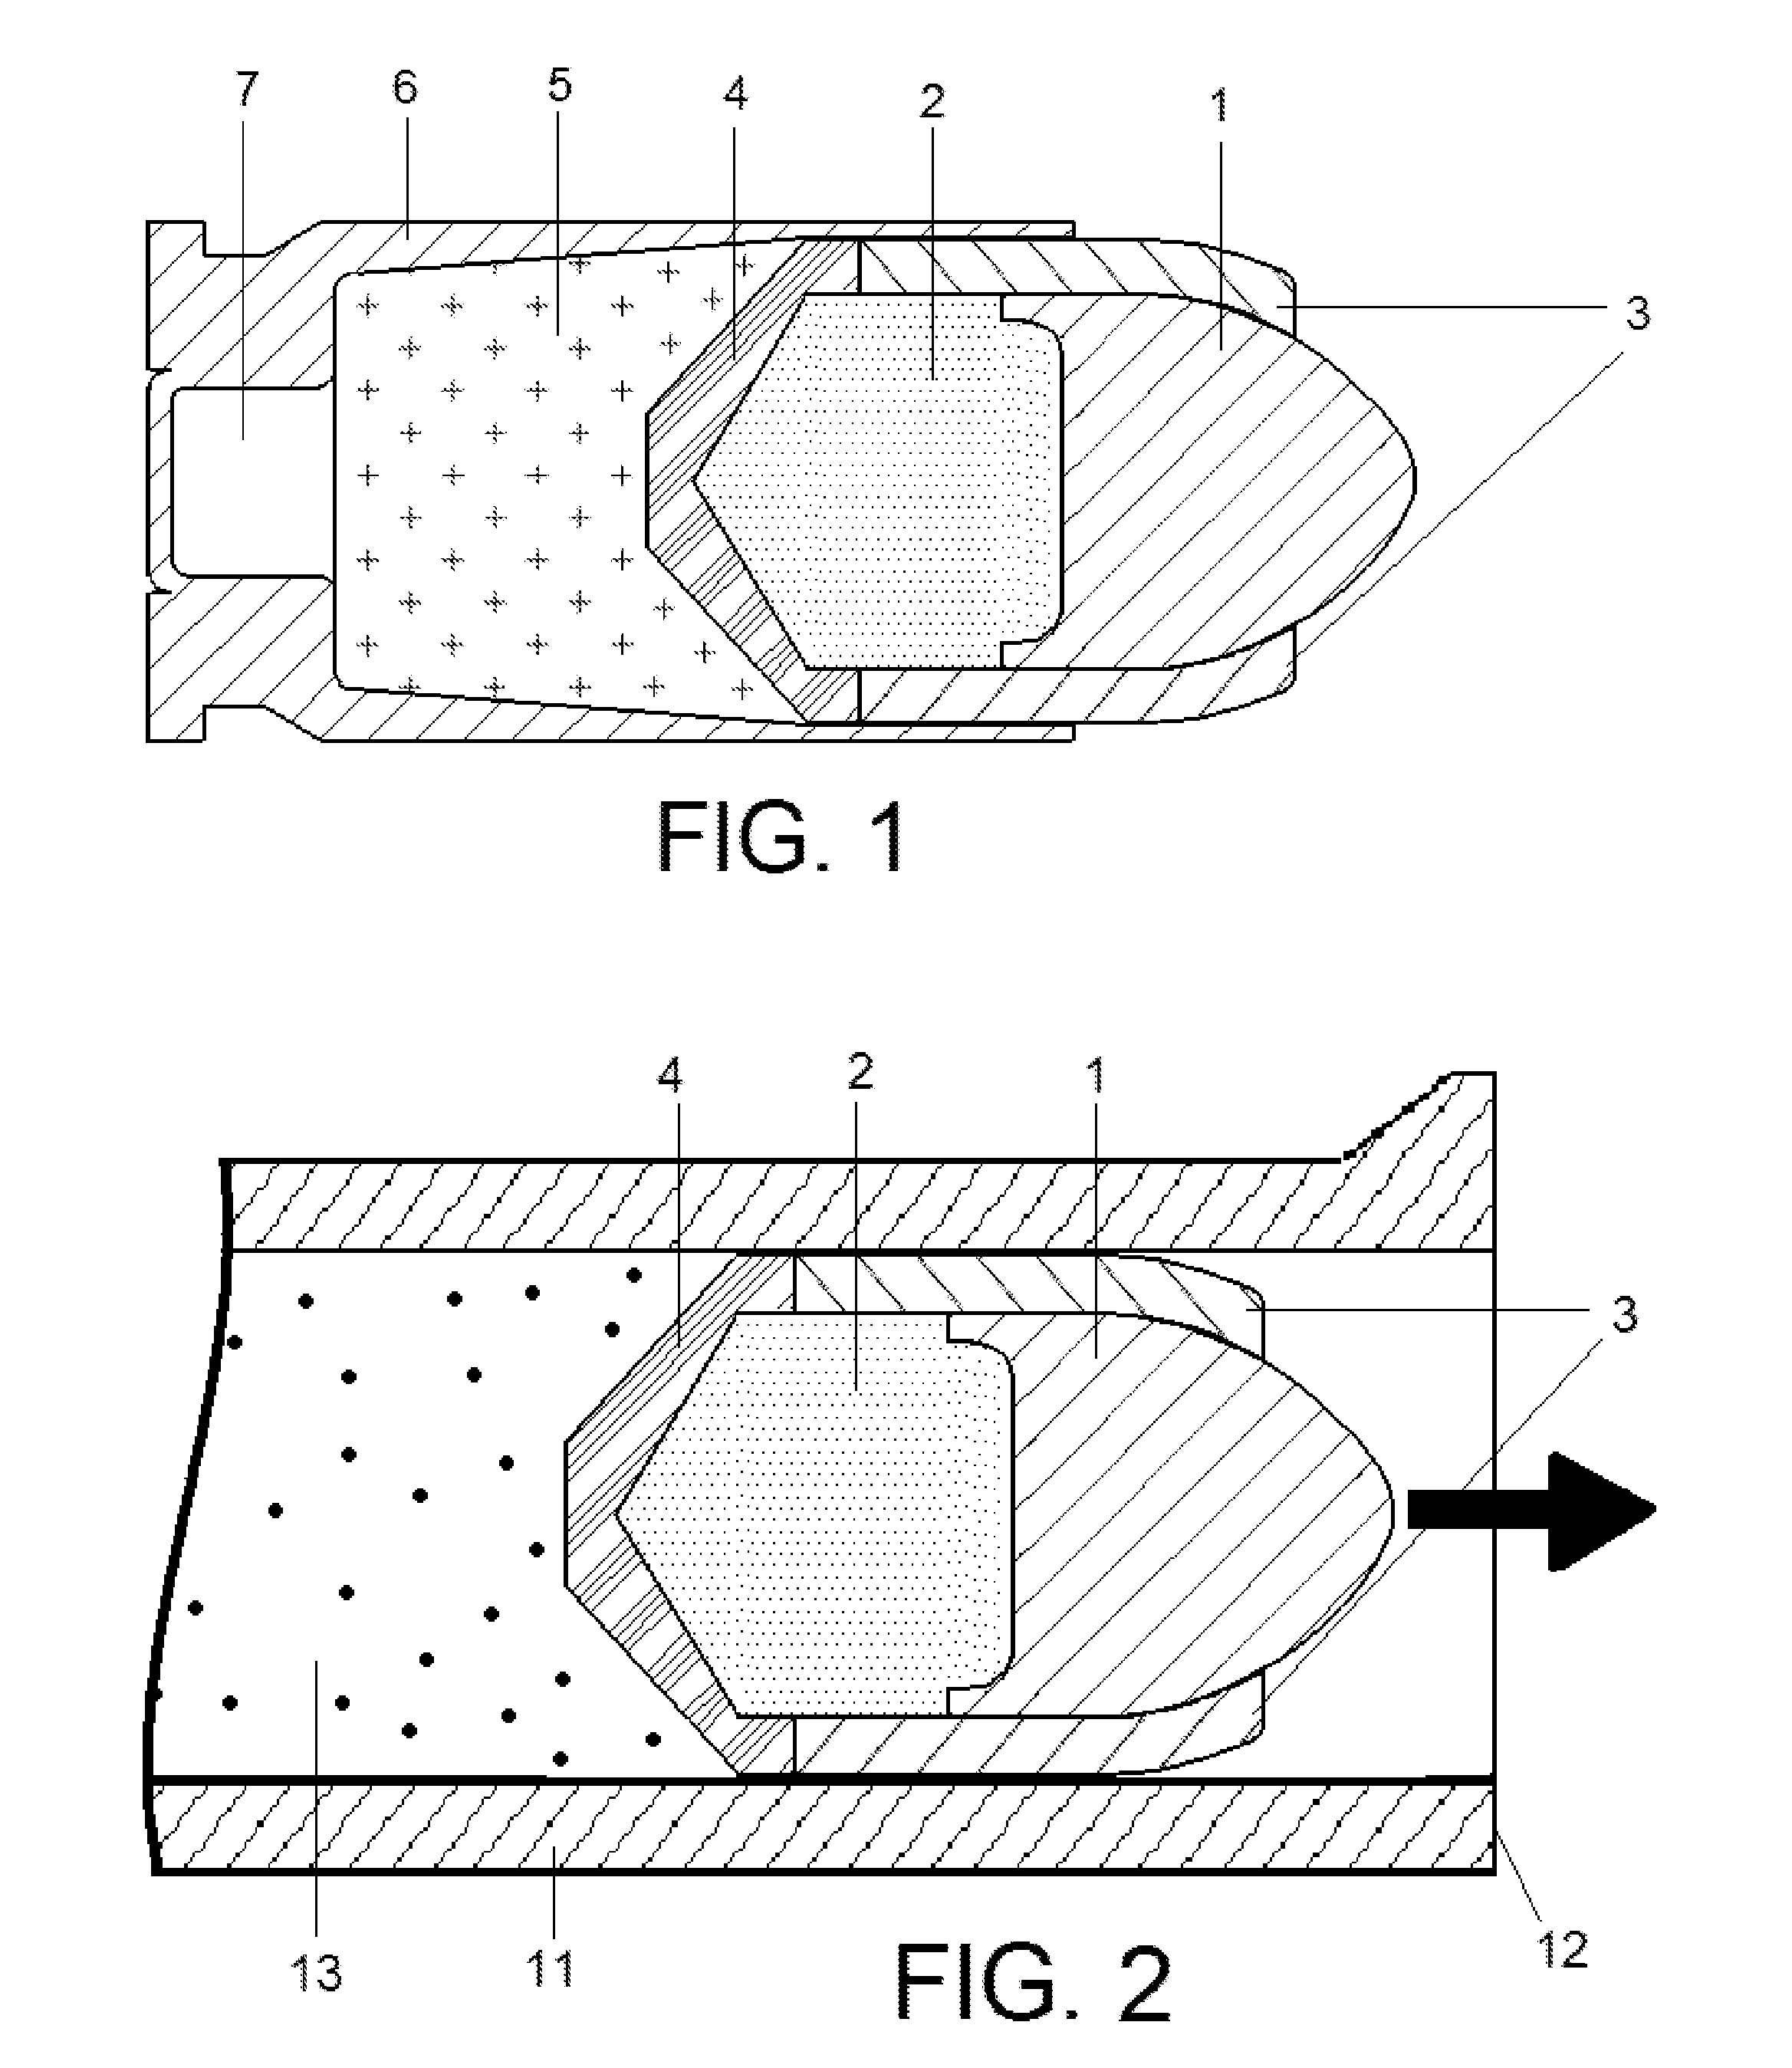 Cartridge for light-weighted projectiles